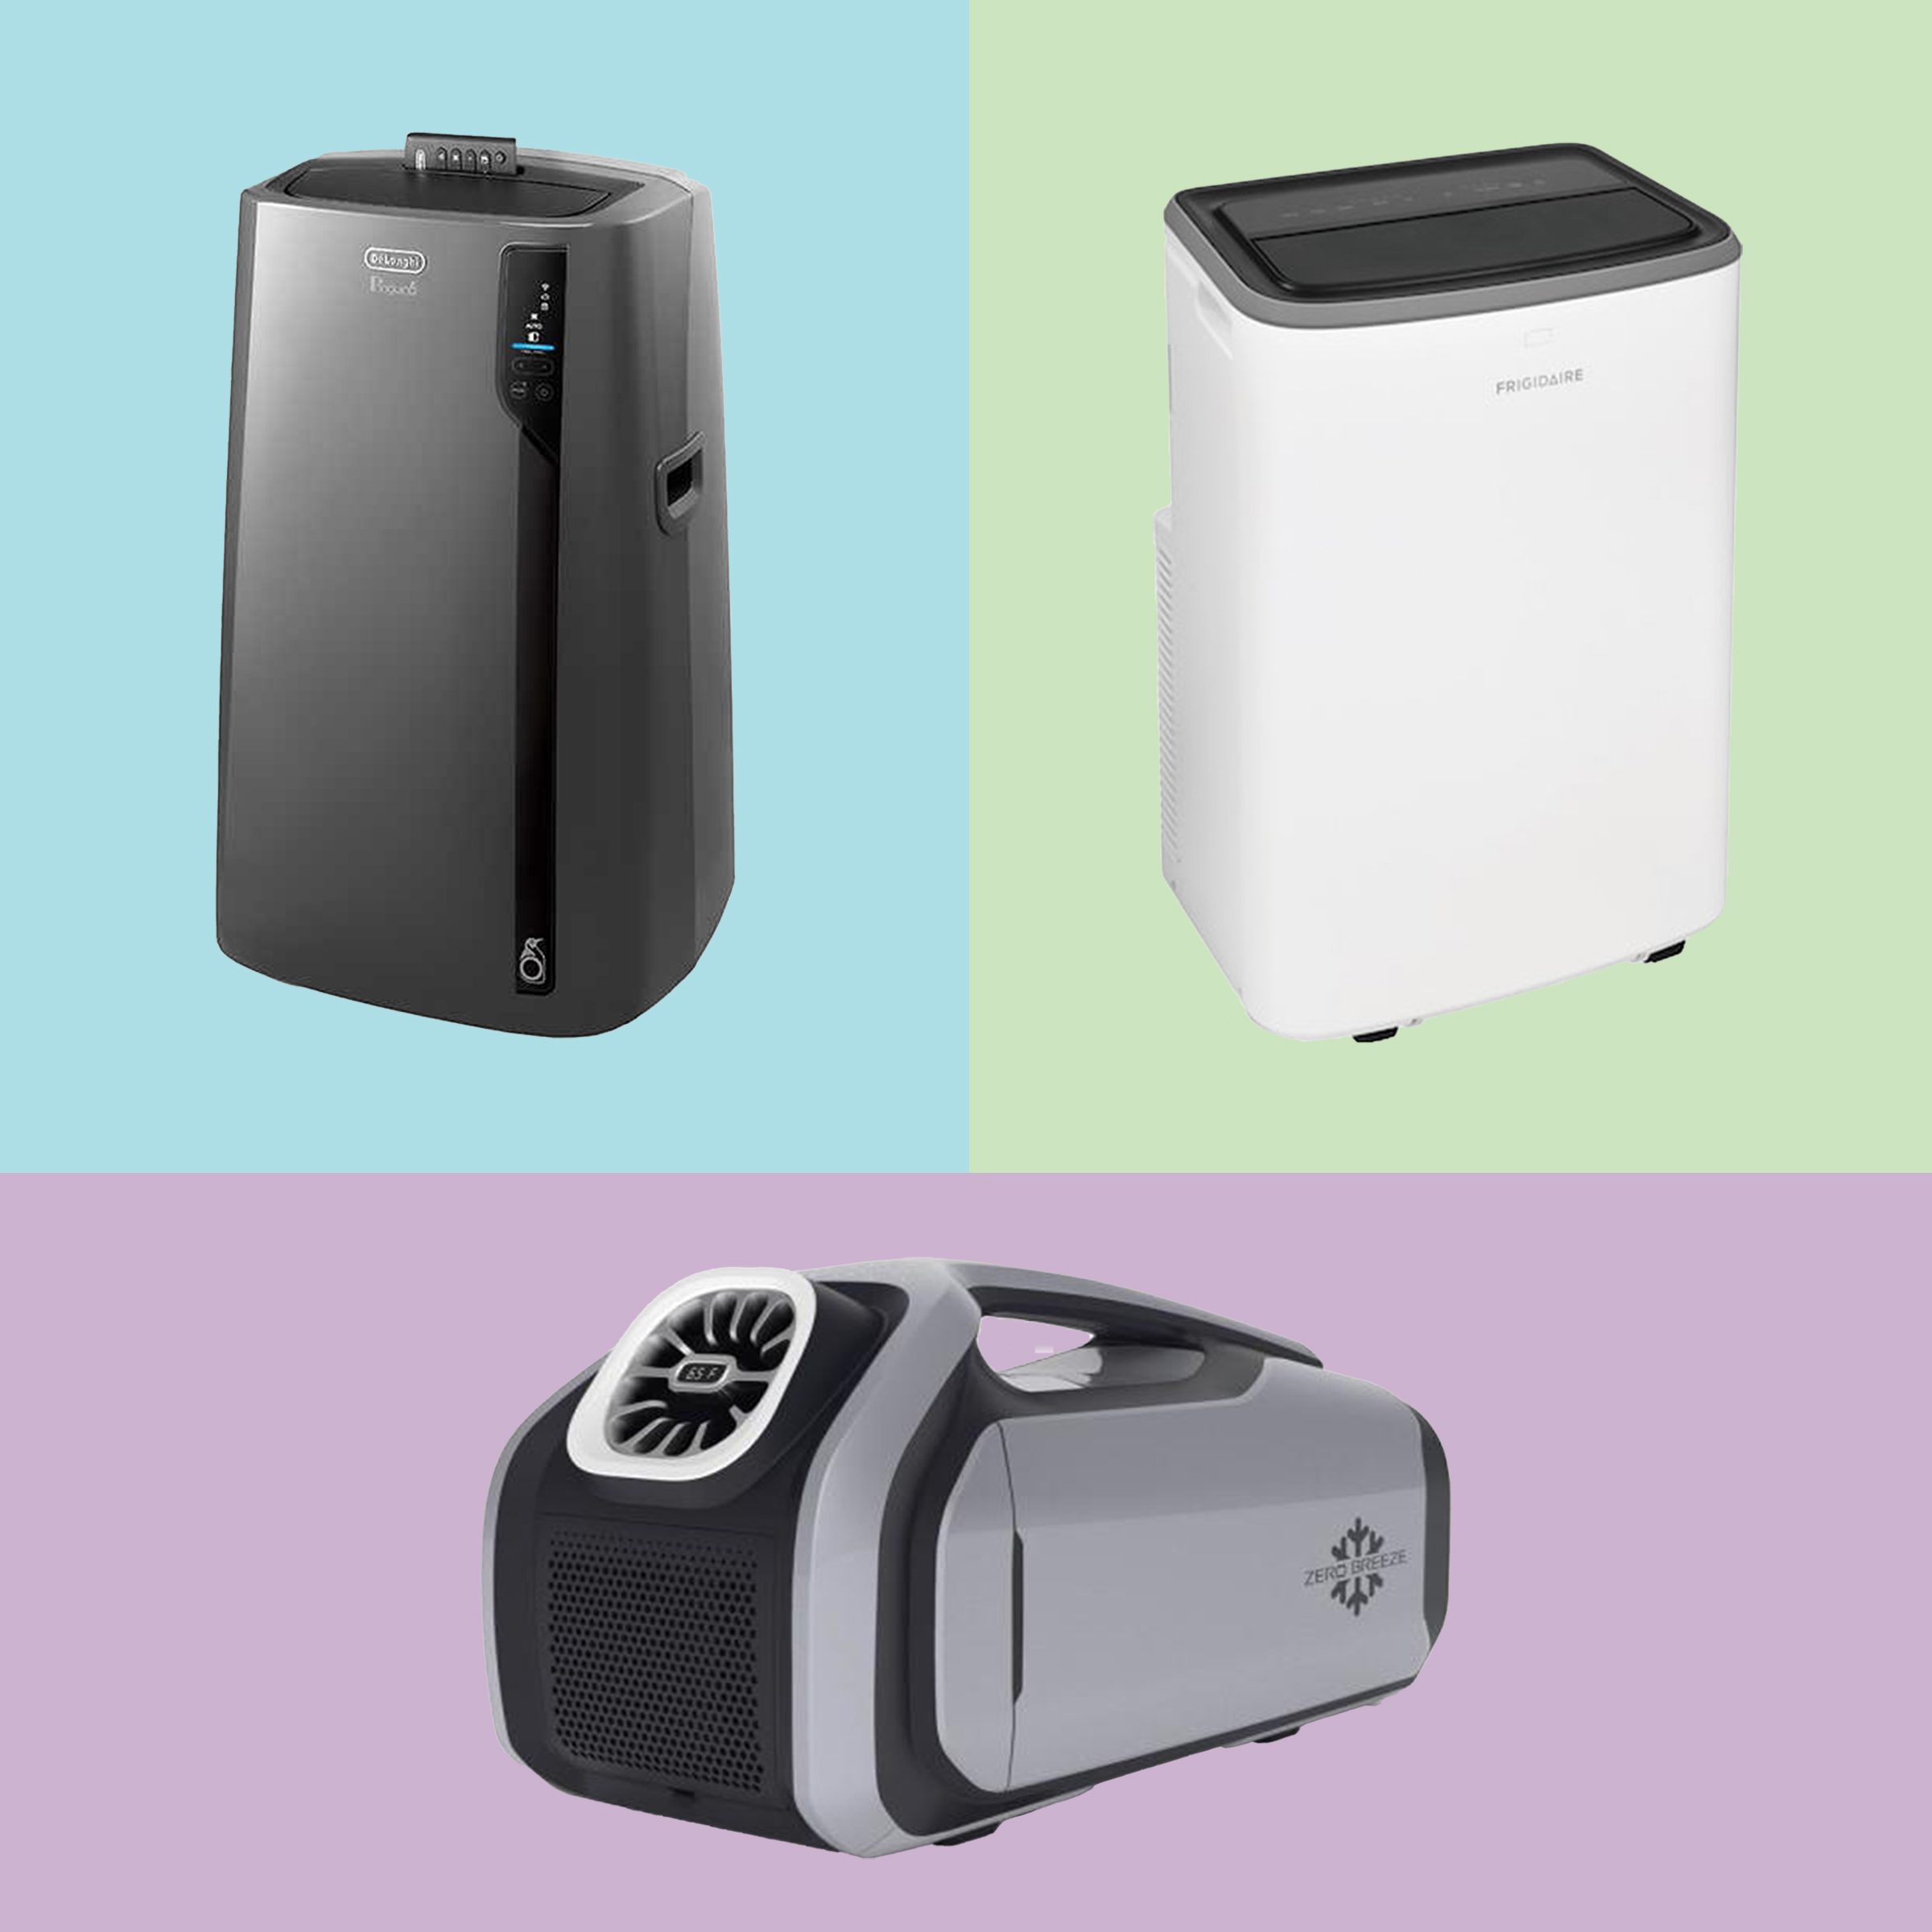 6 best portable air conditioners, according to experts